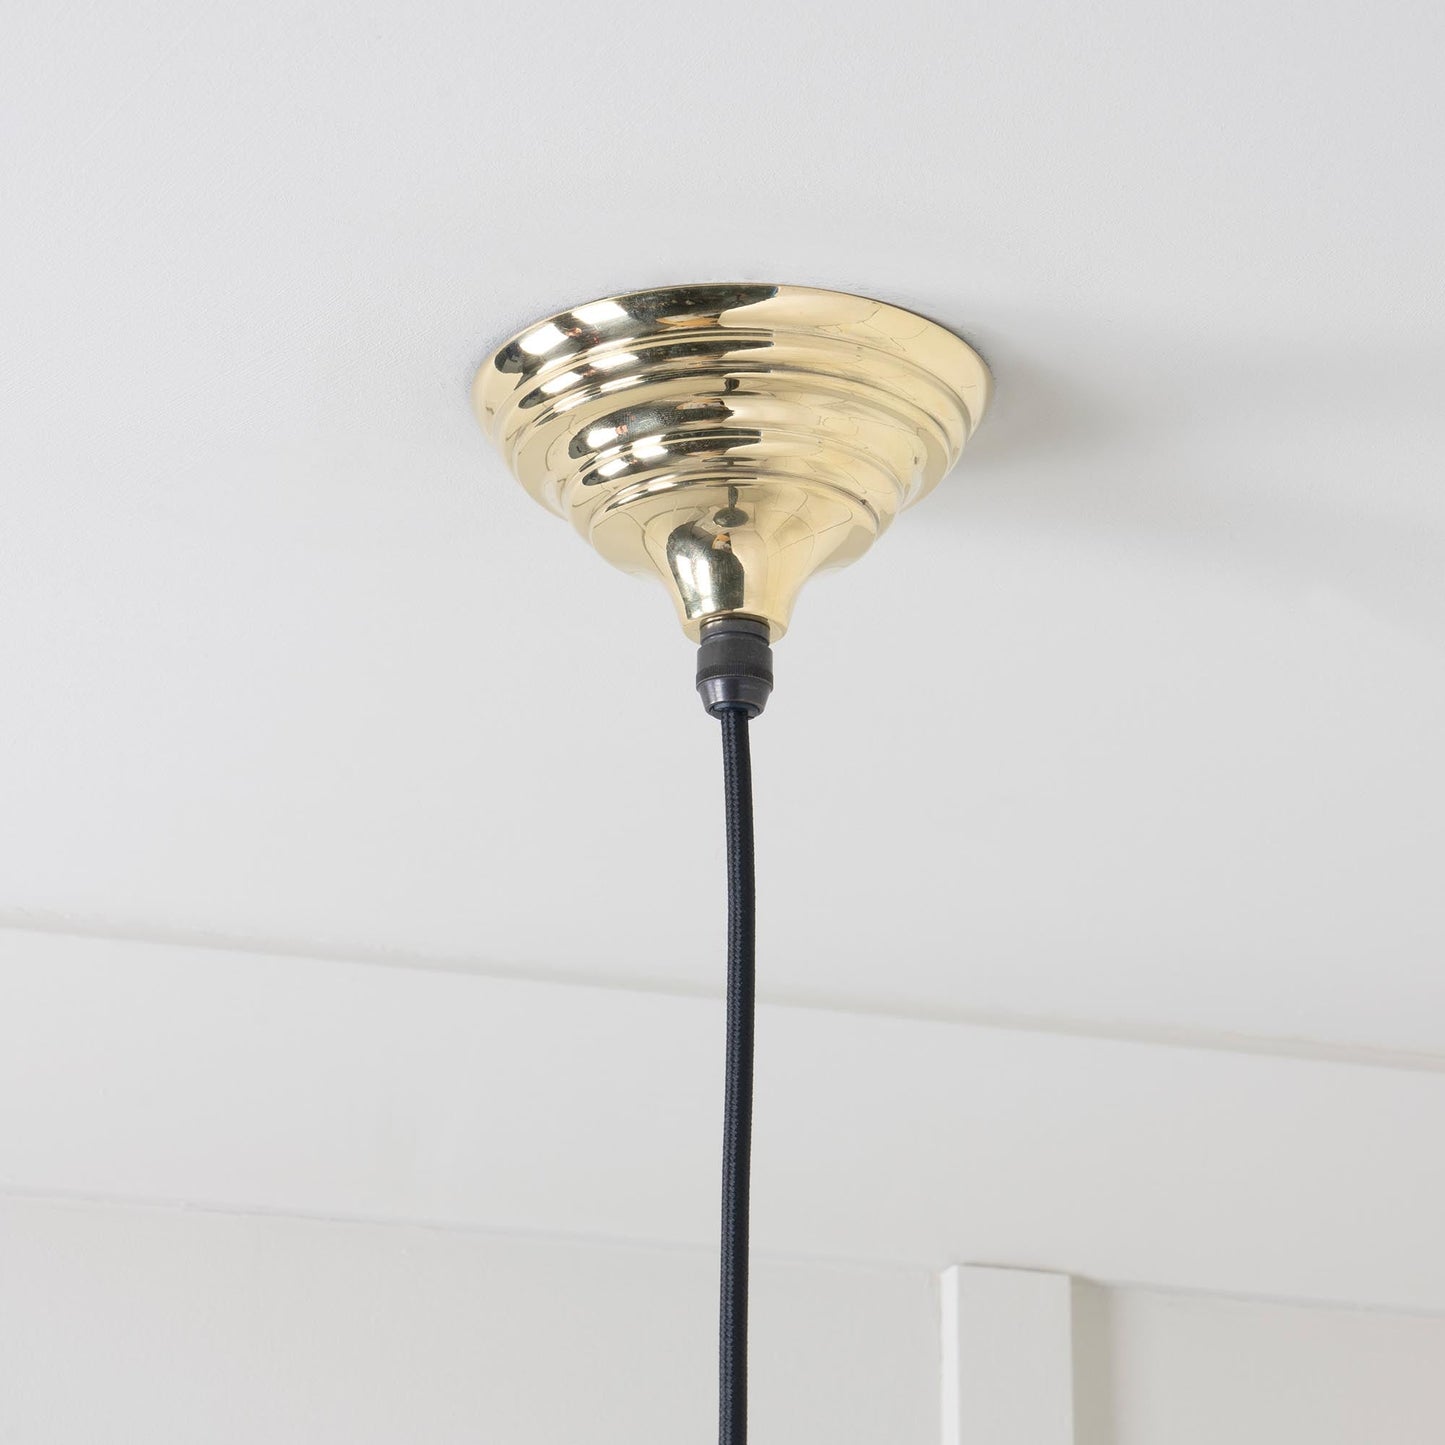 Smooth Brass Harborne Pendant Light , close up view of fitting and cable.